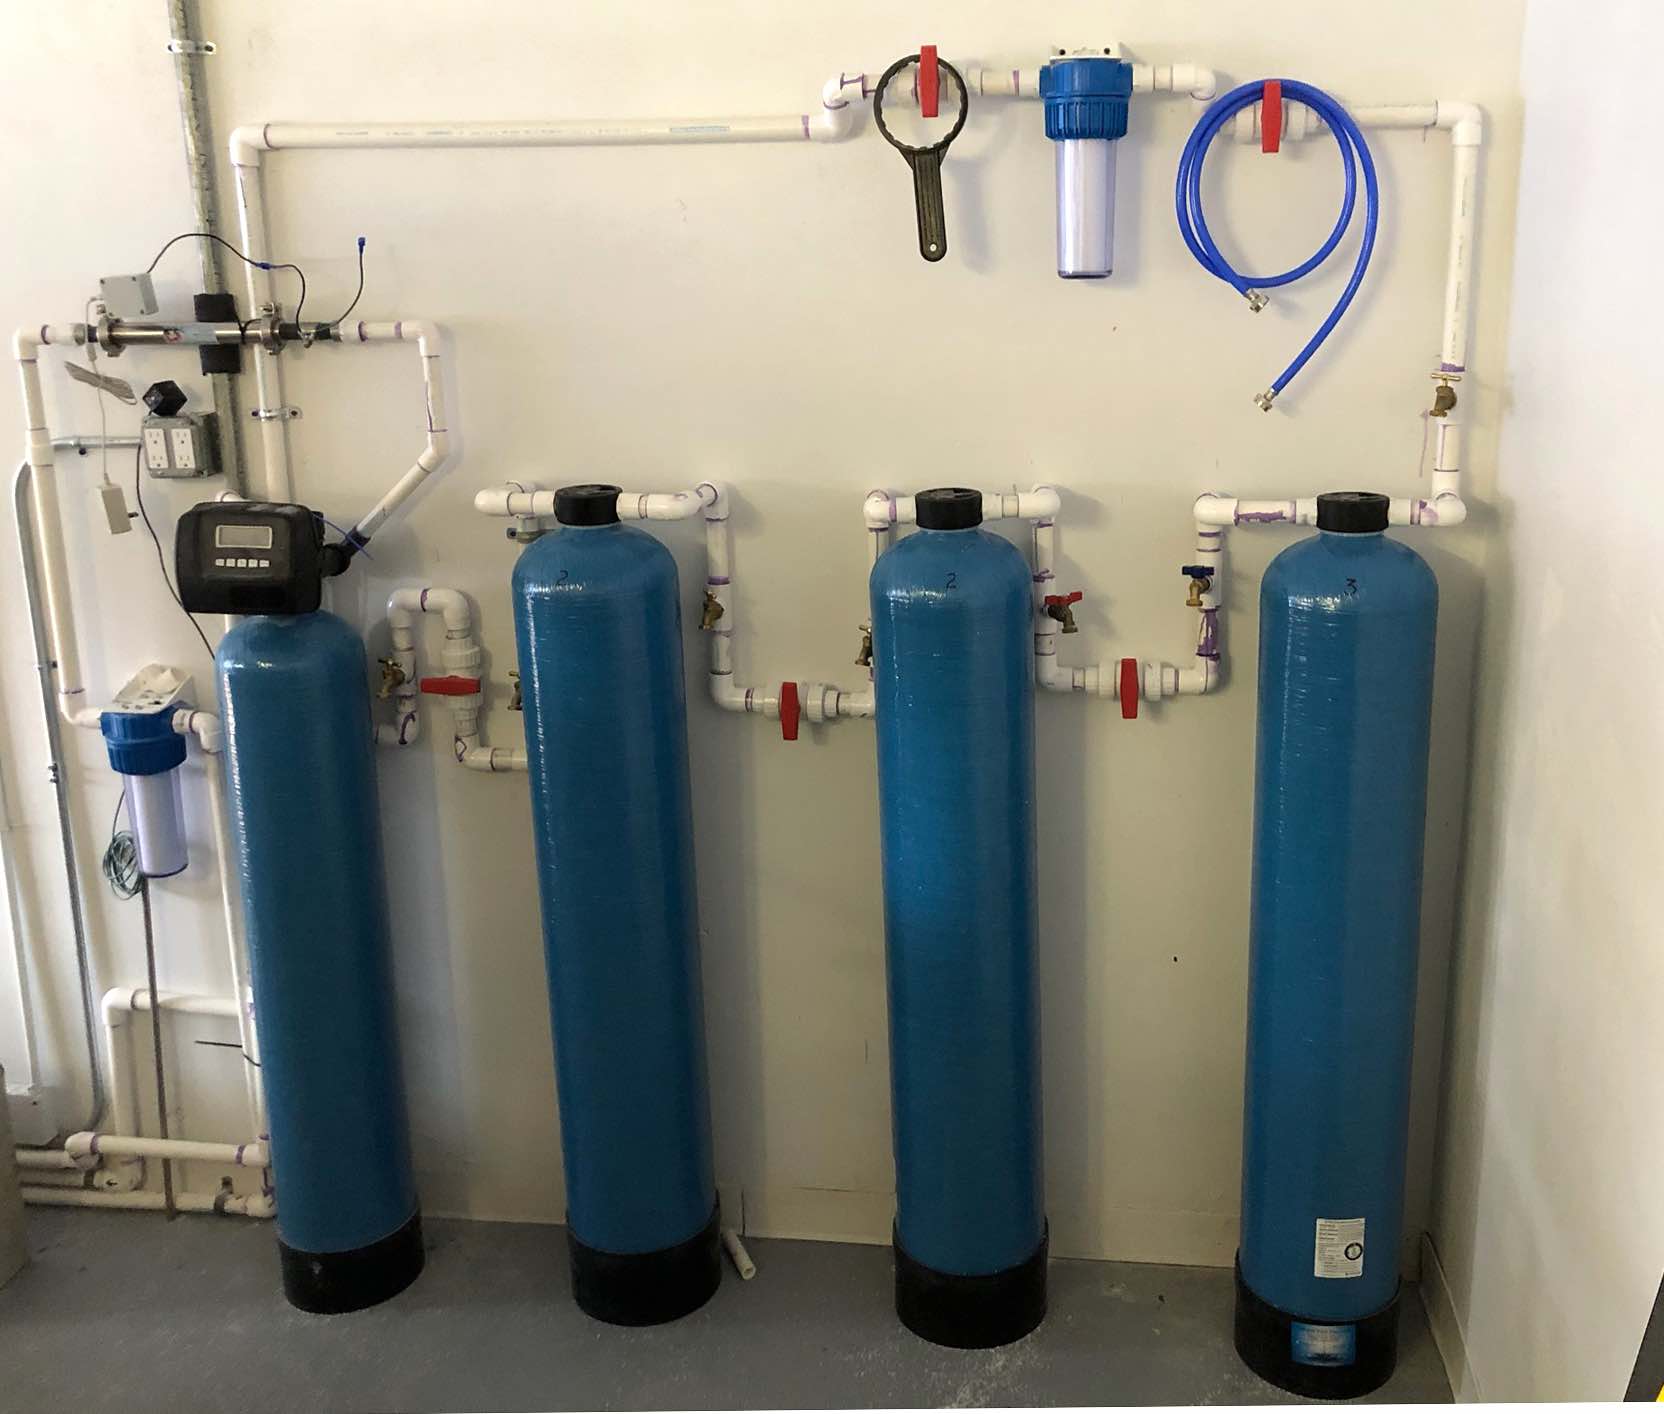 Fluoride removing whole-house filter system